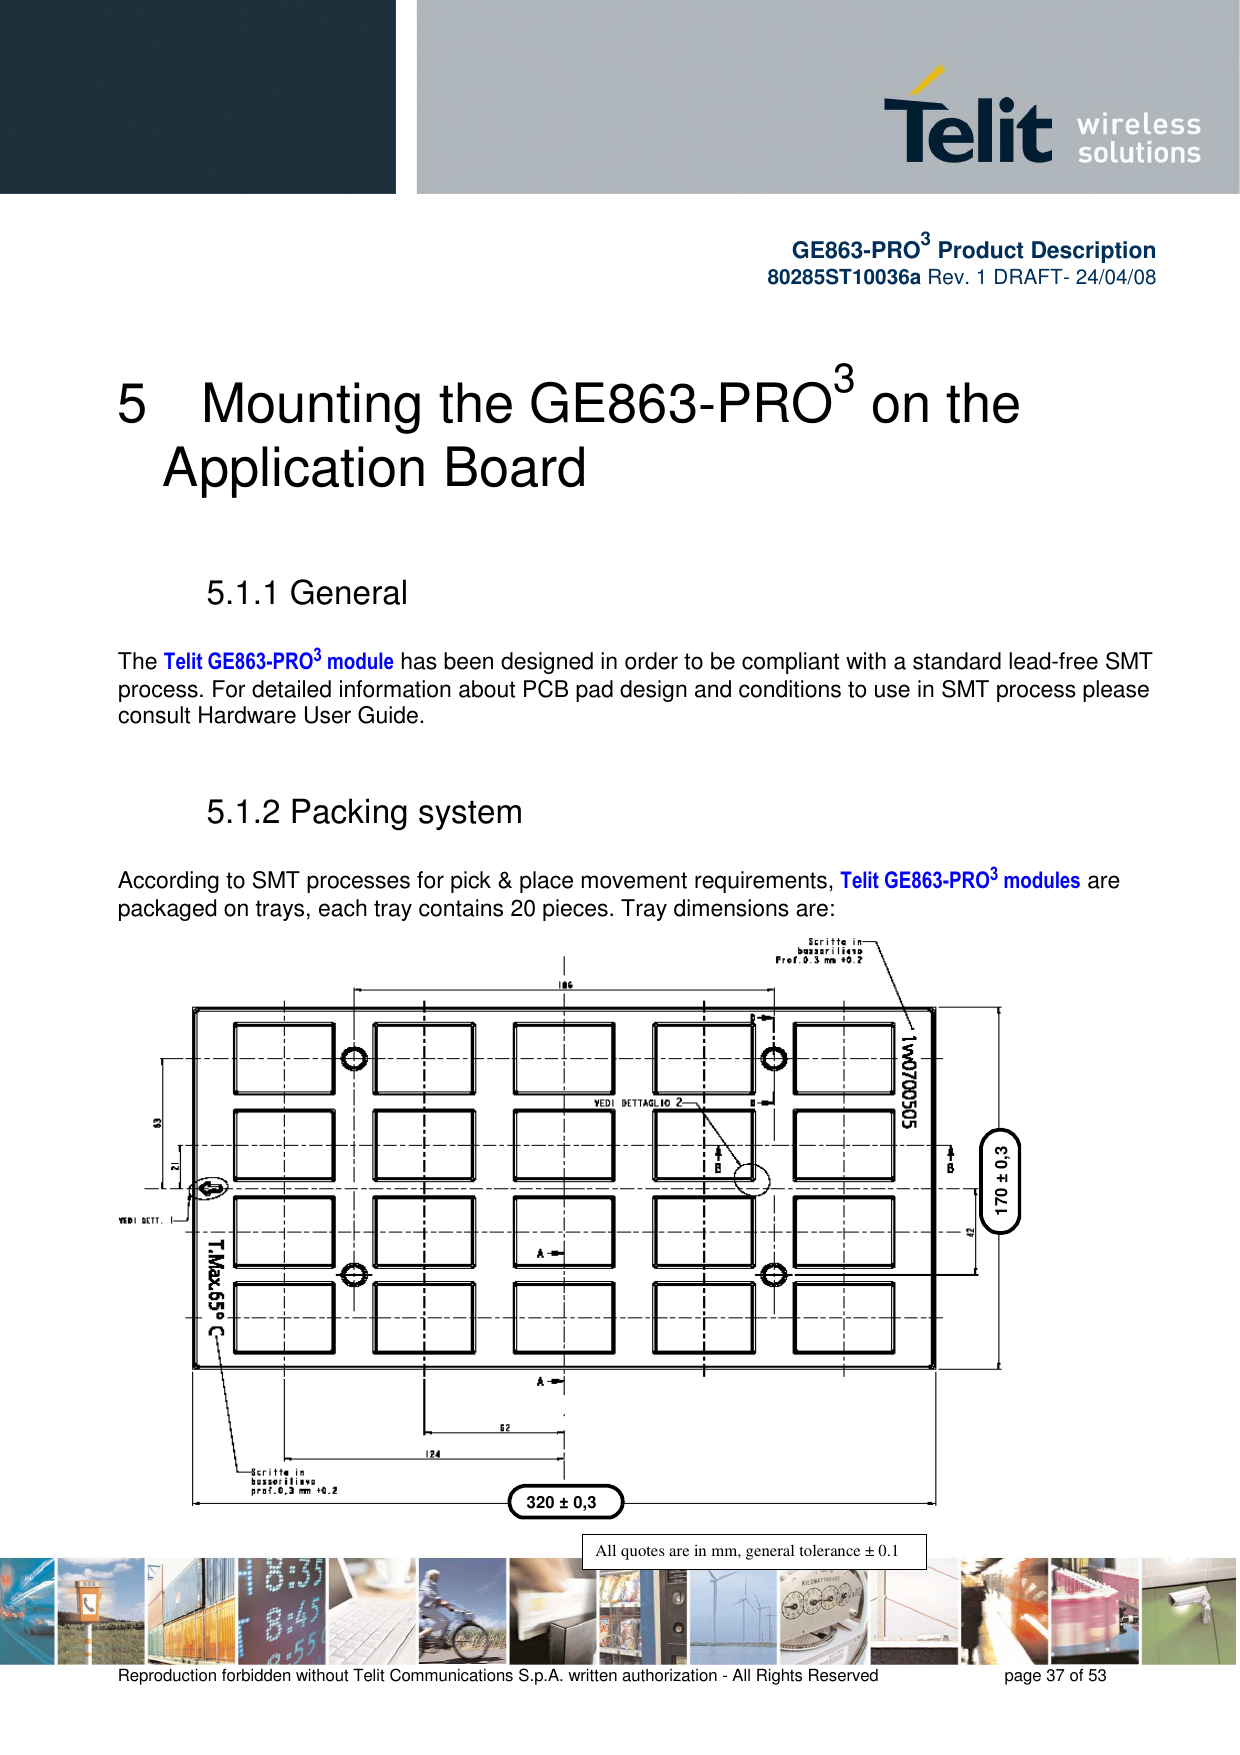       GE863-PRO3 Product Description 80285ST10036a Rev. 1 DRAFT- 24/04/08    Reproduction forbidden without Telit Communications S.p.A. written authorization - All Rights Reserved    page 37 of 53  5  Mounting the GE863-PRO3 on the Application Board 5.1.1 General  The Telit GE863-PRO3 module has been designed in order to be compliant with a standard lead-free SMT process. For detailed information about PCB pad design and conditions to use in SMT process please consult Hardware User Guide.  5.1.2 Packing system   According to SMT processes for pick &amp; place movement requirements, Telit GE863-PRO3 modules are packaged on trays, each tray contains 20 pieces. Tray dimensions are:                         320 ± 0,3 170 ± 0,3 All quotes are in mm, general tolerance ± 0.1 